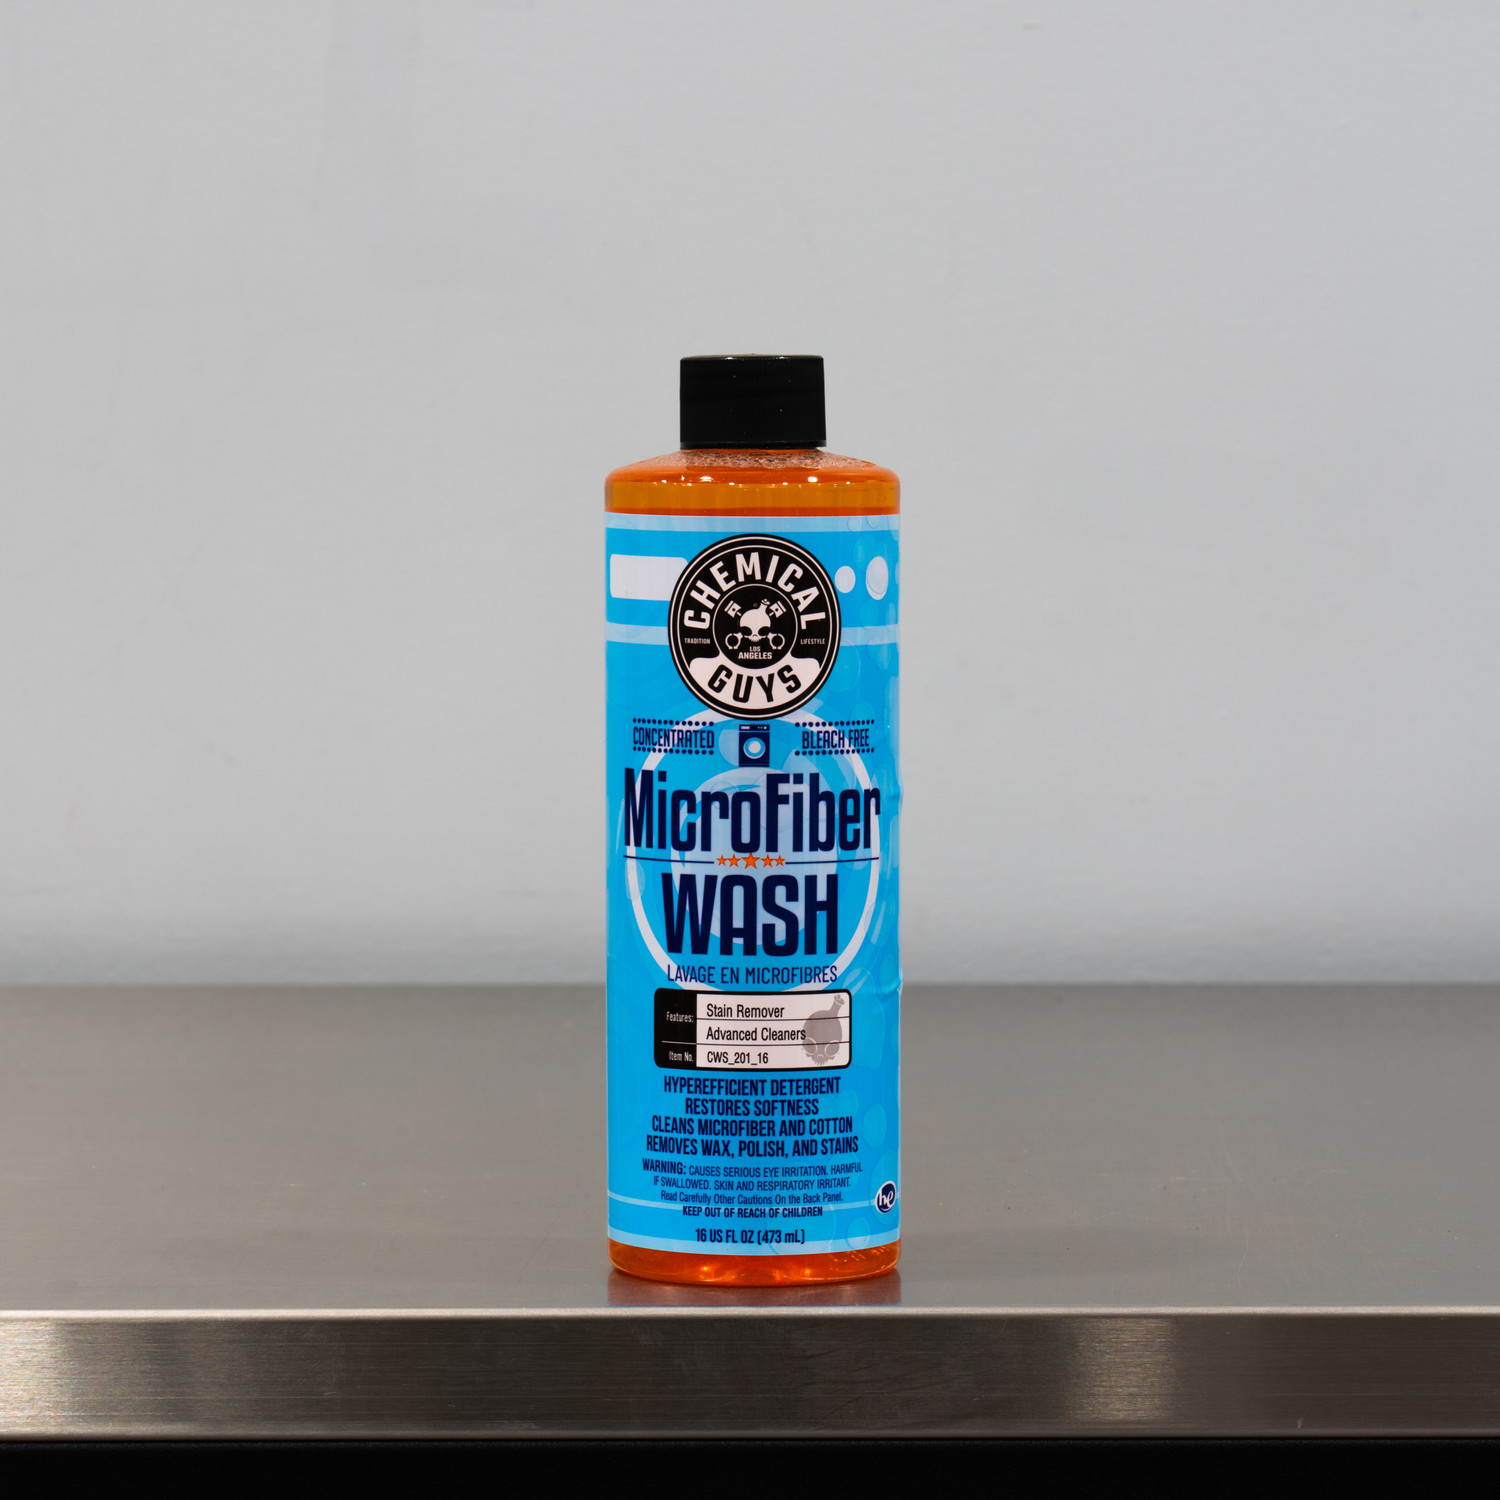 Chemical Guys Microfiber Wash (Review) - Better Than Laundry Detergent? 